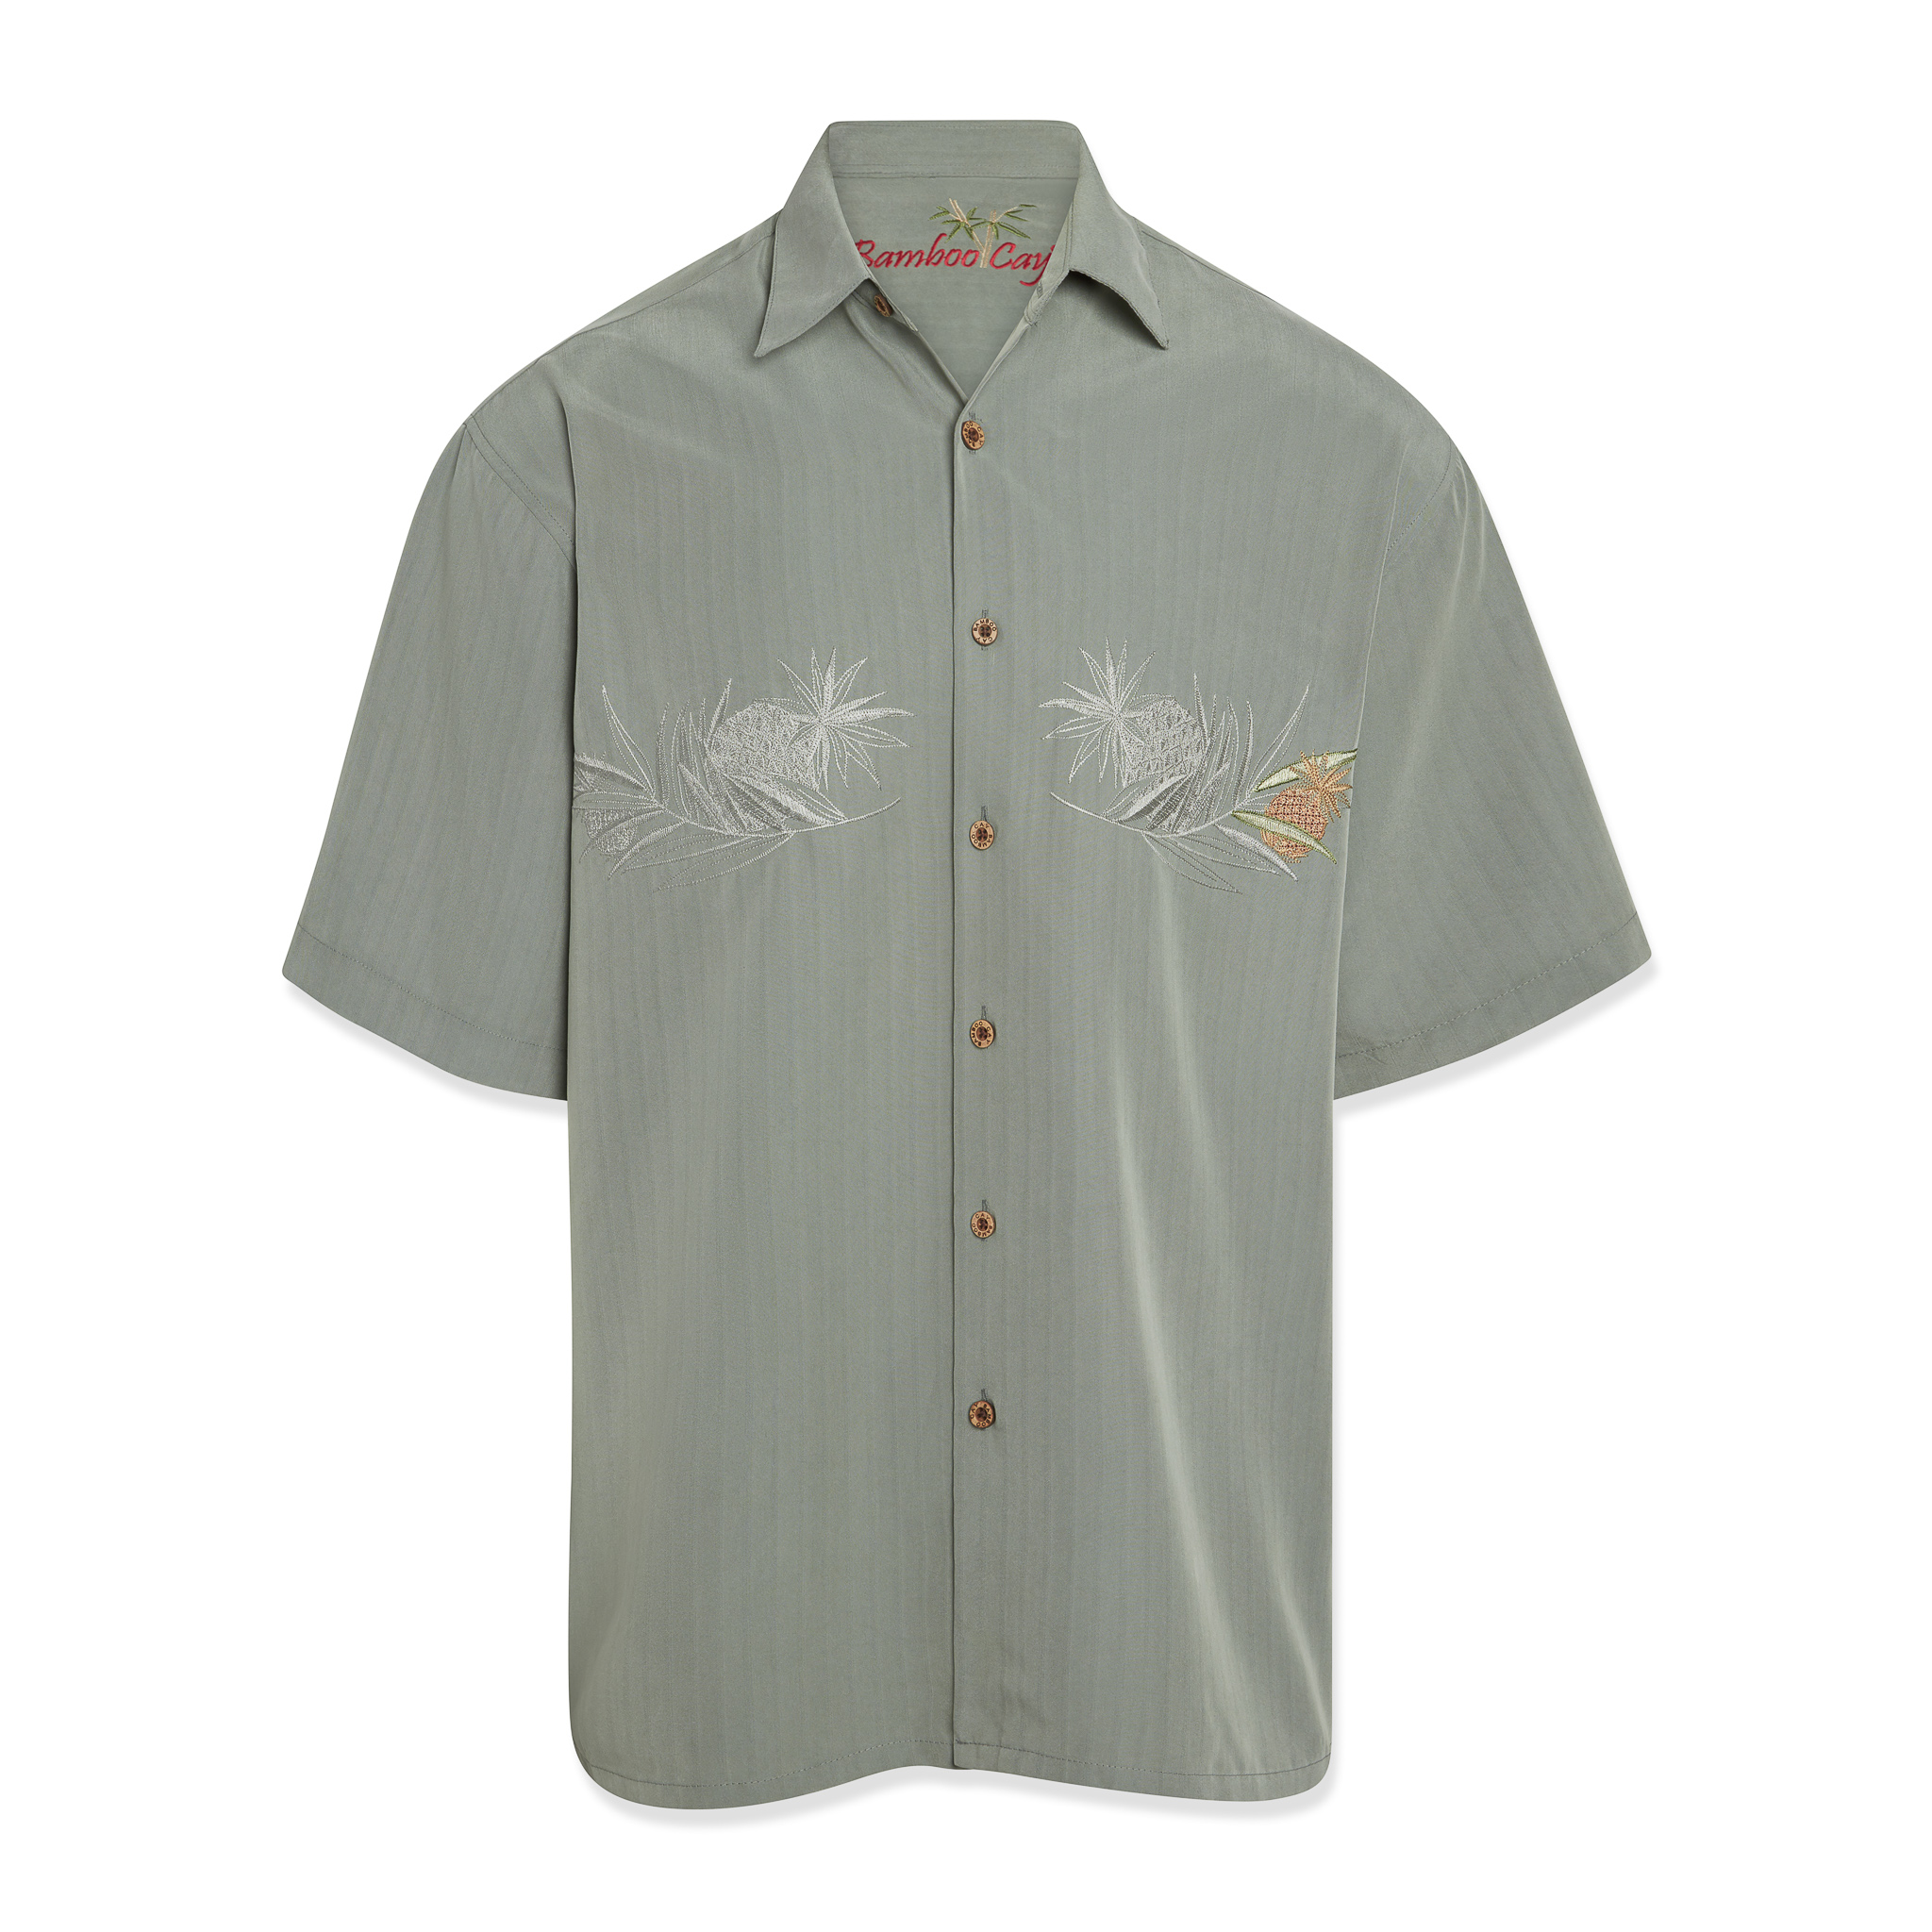 bamboo cay lovely pineapple short sleeve button down shirt